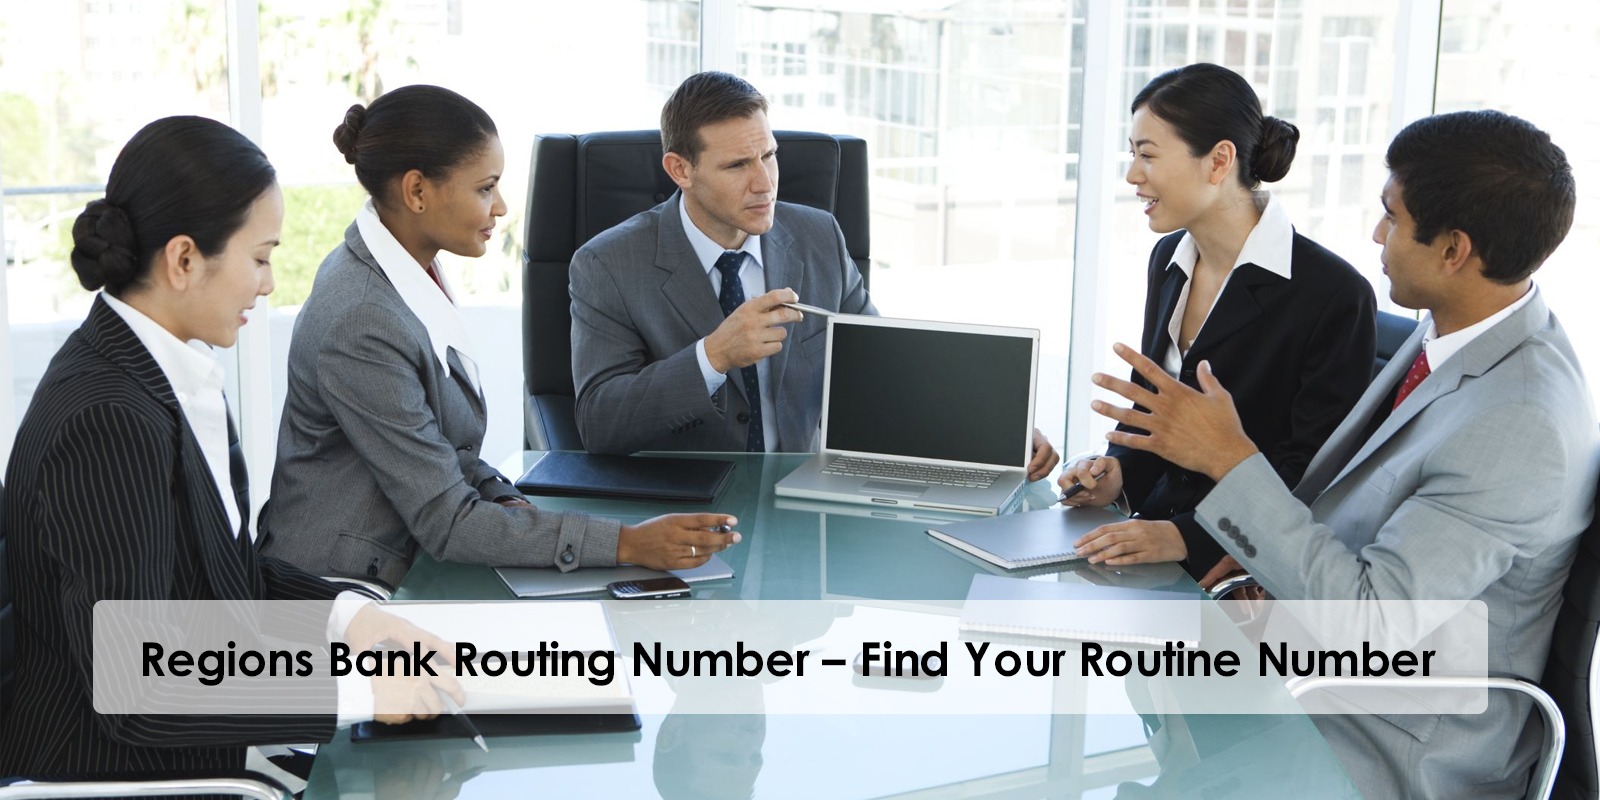 Regions Bank Routing Number - Find Your Routine Number